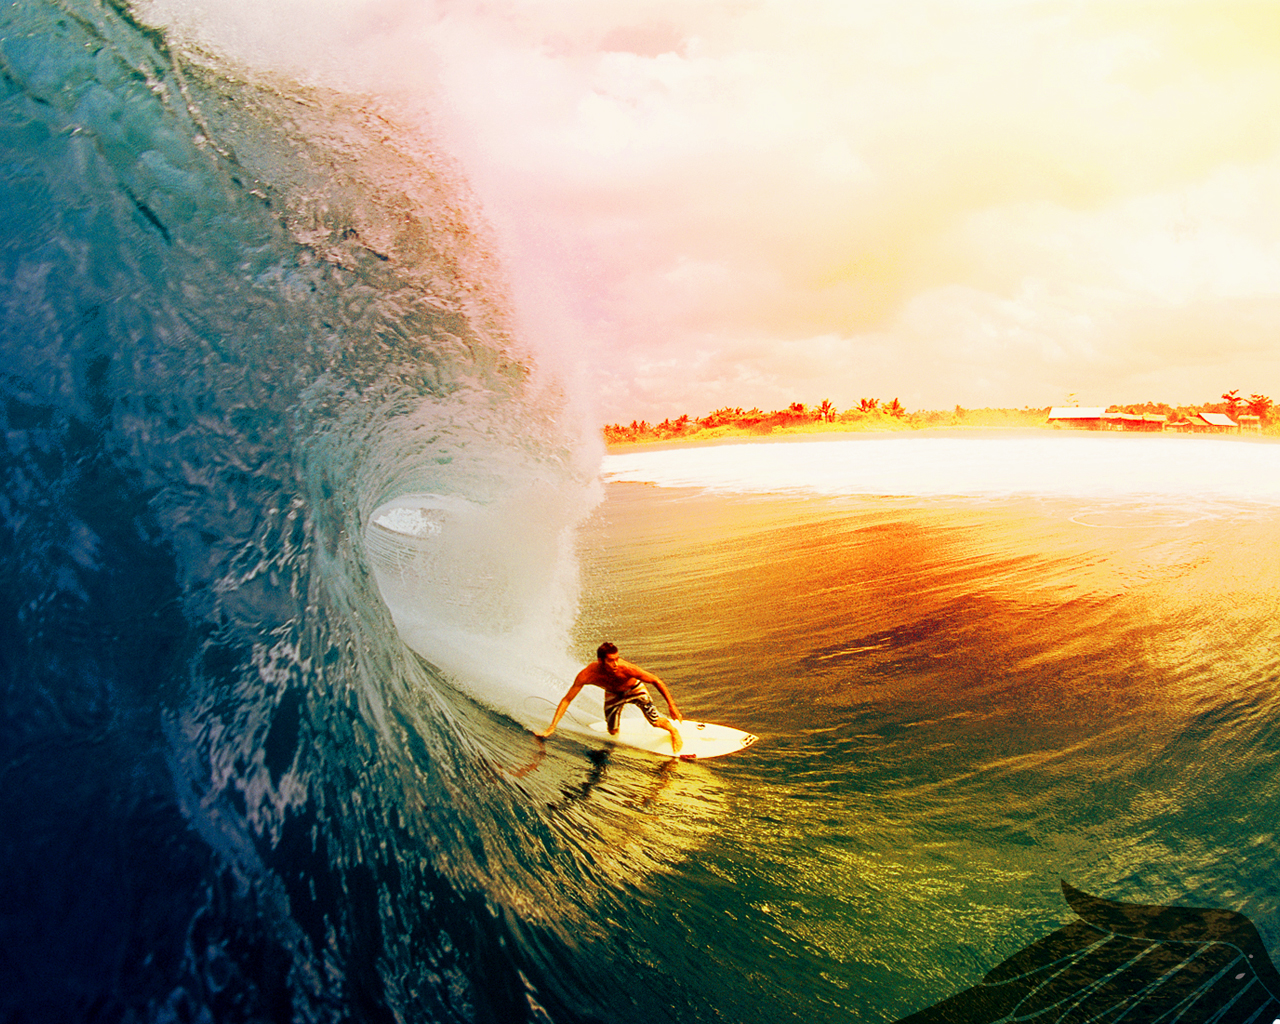 A man on a surfboard riding a wave in the ocean. - Surf